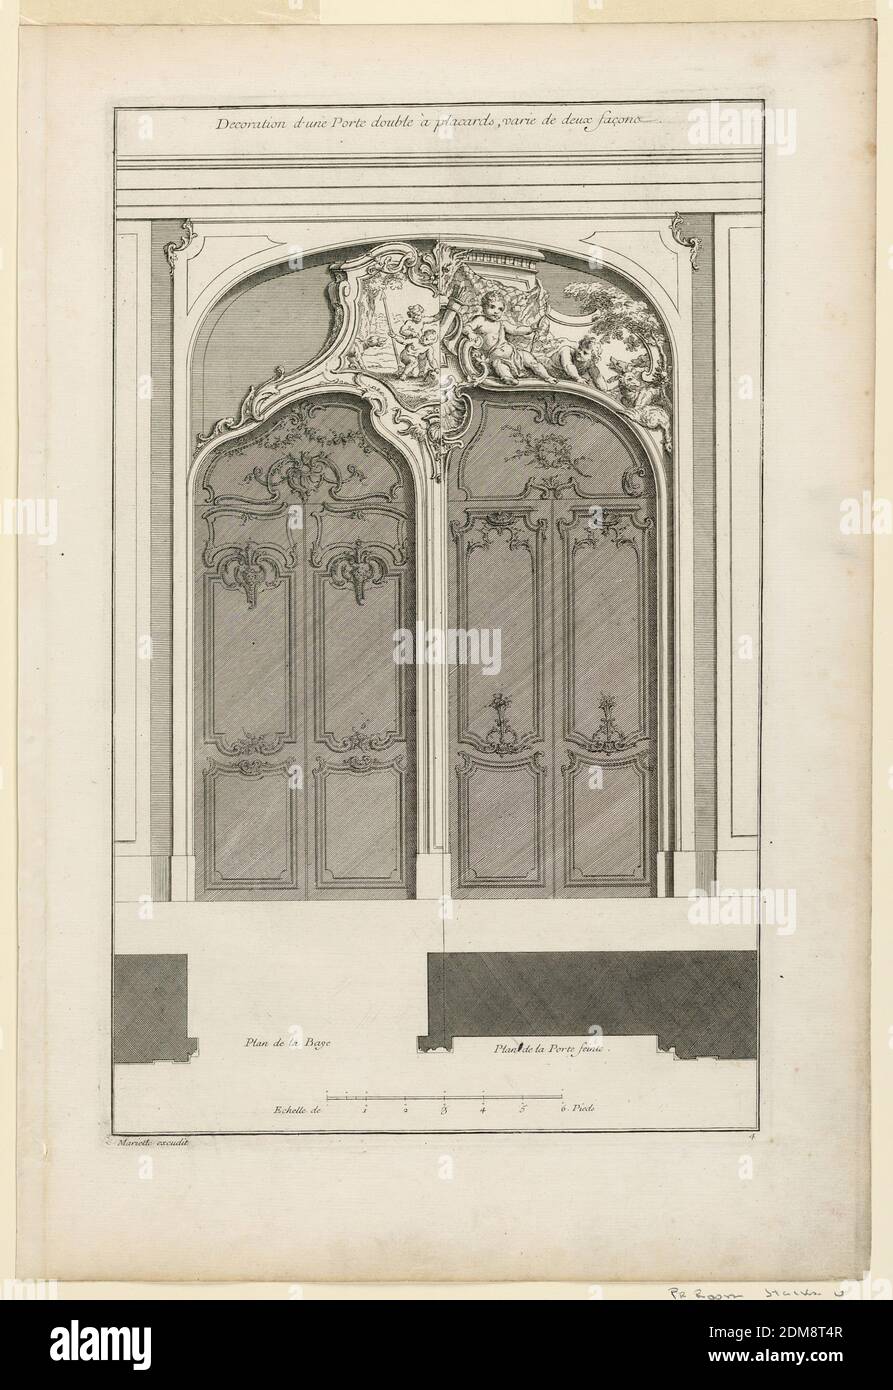 Plate 4, 'Decoration d'une Portal double à placards varie de deux façons', Jacques-François Blondel, French, 1705 - 1774, Jean Mariette, 1660–1742, Engraving on paper, Two double doors in a joint frame with a curved top. Both doors decorated with different carving. Joint overdoor with alternate suggestions of paintings depicting putti. Enclosed in a pediment-like frame. Below, drawing of profile. Inscribed along upper margin, title; lower left: 'Mariette excudit'; lower right: '4'., France, ca. 1727, Print Stock Photo